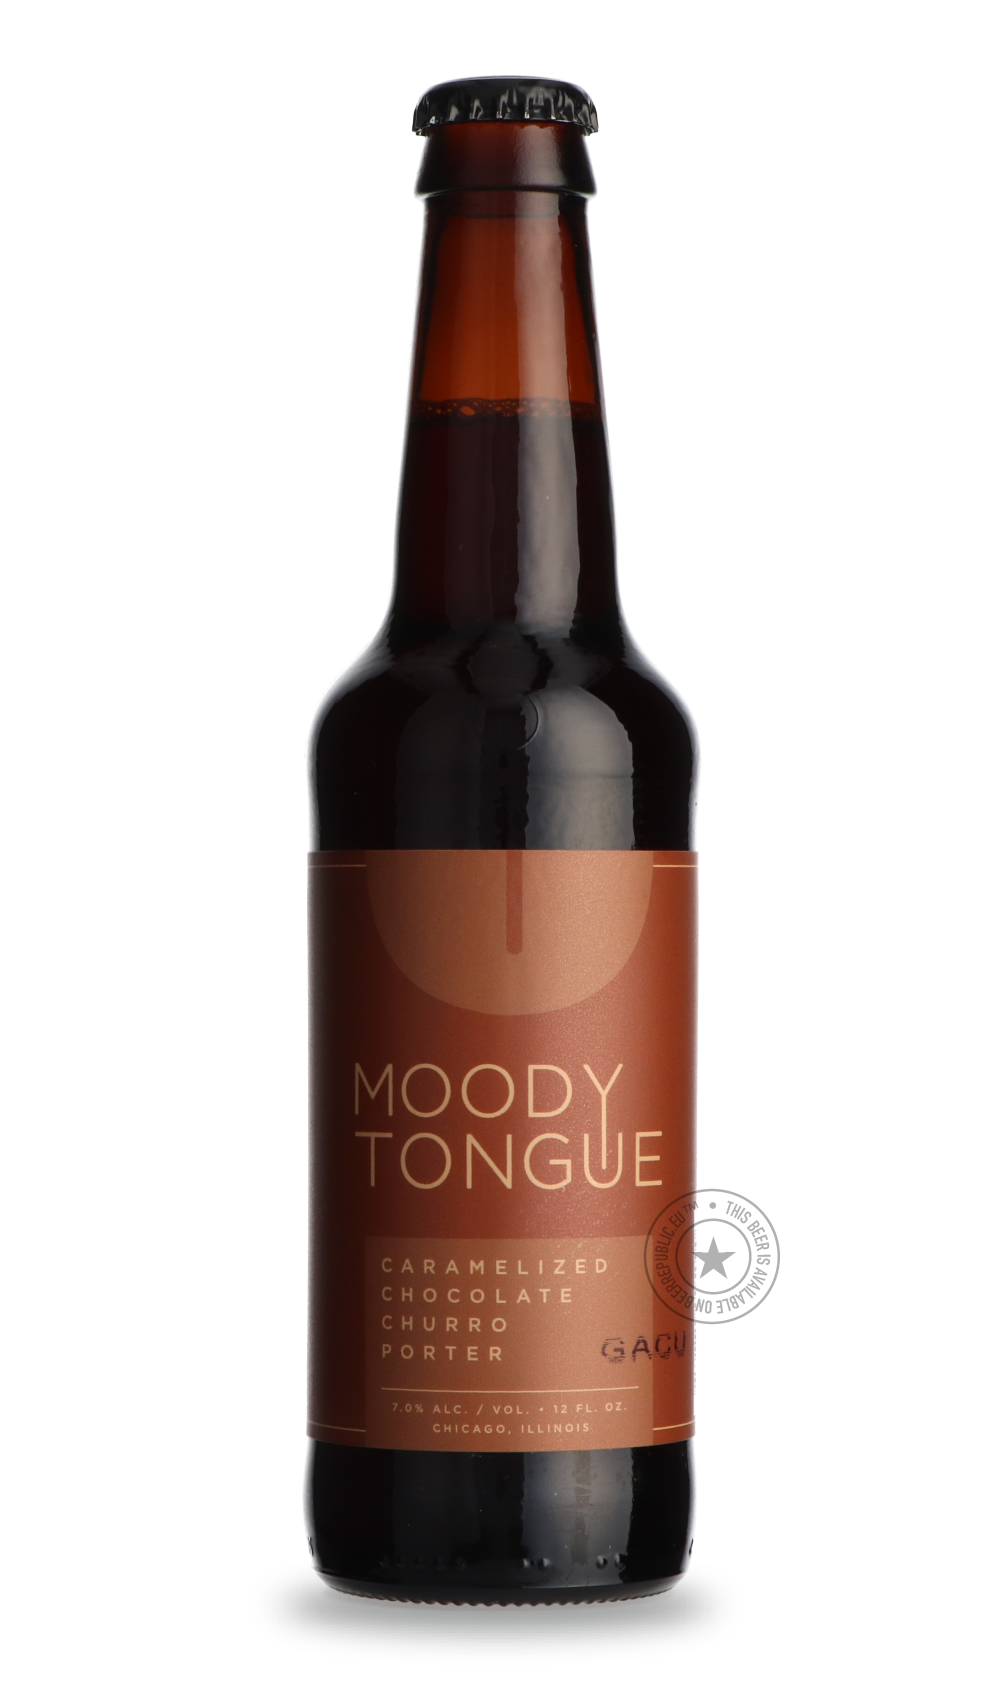 -Moody Tongue- Caramelized Chocolate Churro Baltic Porter-Stout & Porter- Only @ Beer Republic - The best online beer store for American & Canadian craft beer - Buy beer online from the USA and Canada - Bier online kopen - Amerikaans bier kopen - Craft beer store - Craft beer kopen - Amerikanisch bier kaufen - Bier online kaufen - Acheter biere online - IPA - Stout - Porter - New England IPA - Hazy IPA - Imperial Stout - Barrel Aged - Barrel Aged Imperial Stout - Brown - Dark beer - Blond - Blonde - Pilsner